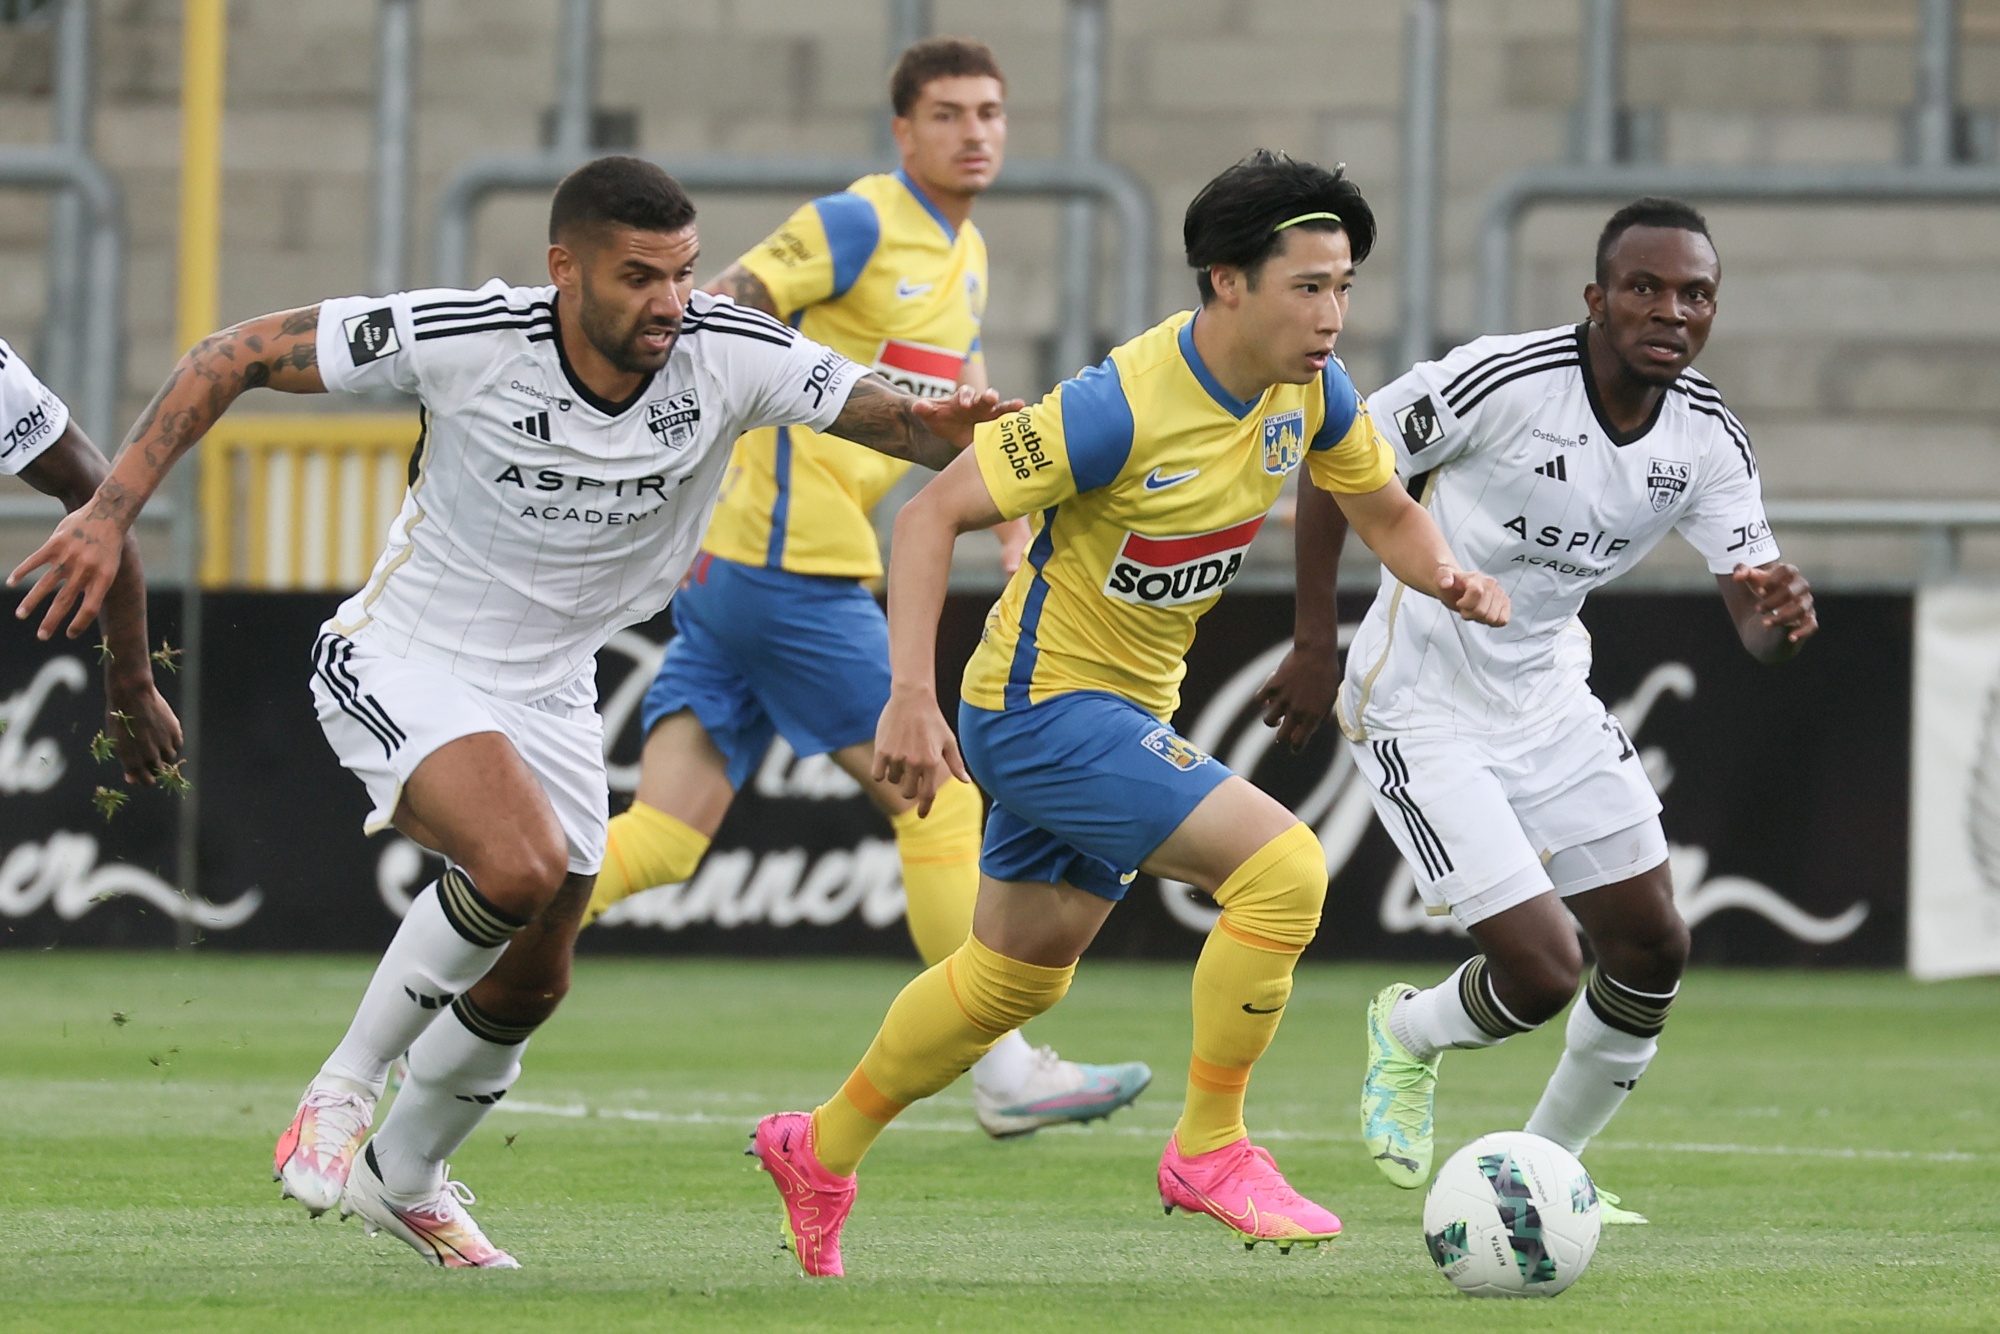 Westerlo's Yusuke Matsuo pictured in action during a soccer match between KAS Eupen and KVC Westerlo, Saturday 29 July 2023 in Eupen, on day 1/30 of the 2023-2024 'Jupiler Pro League' first division of the Belgian championship. BELGA PHOTO BRUNO FAHY